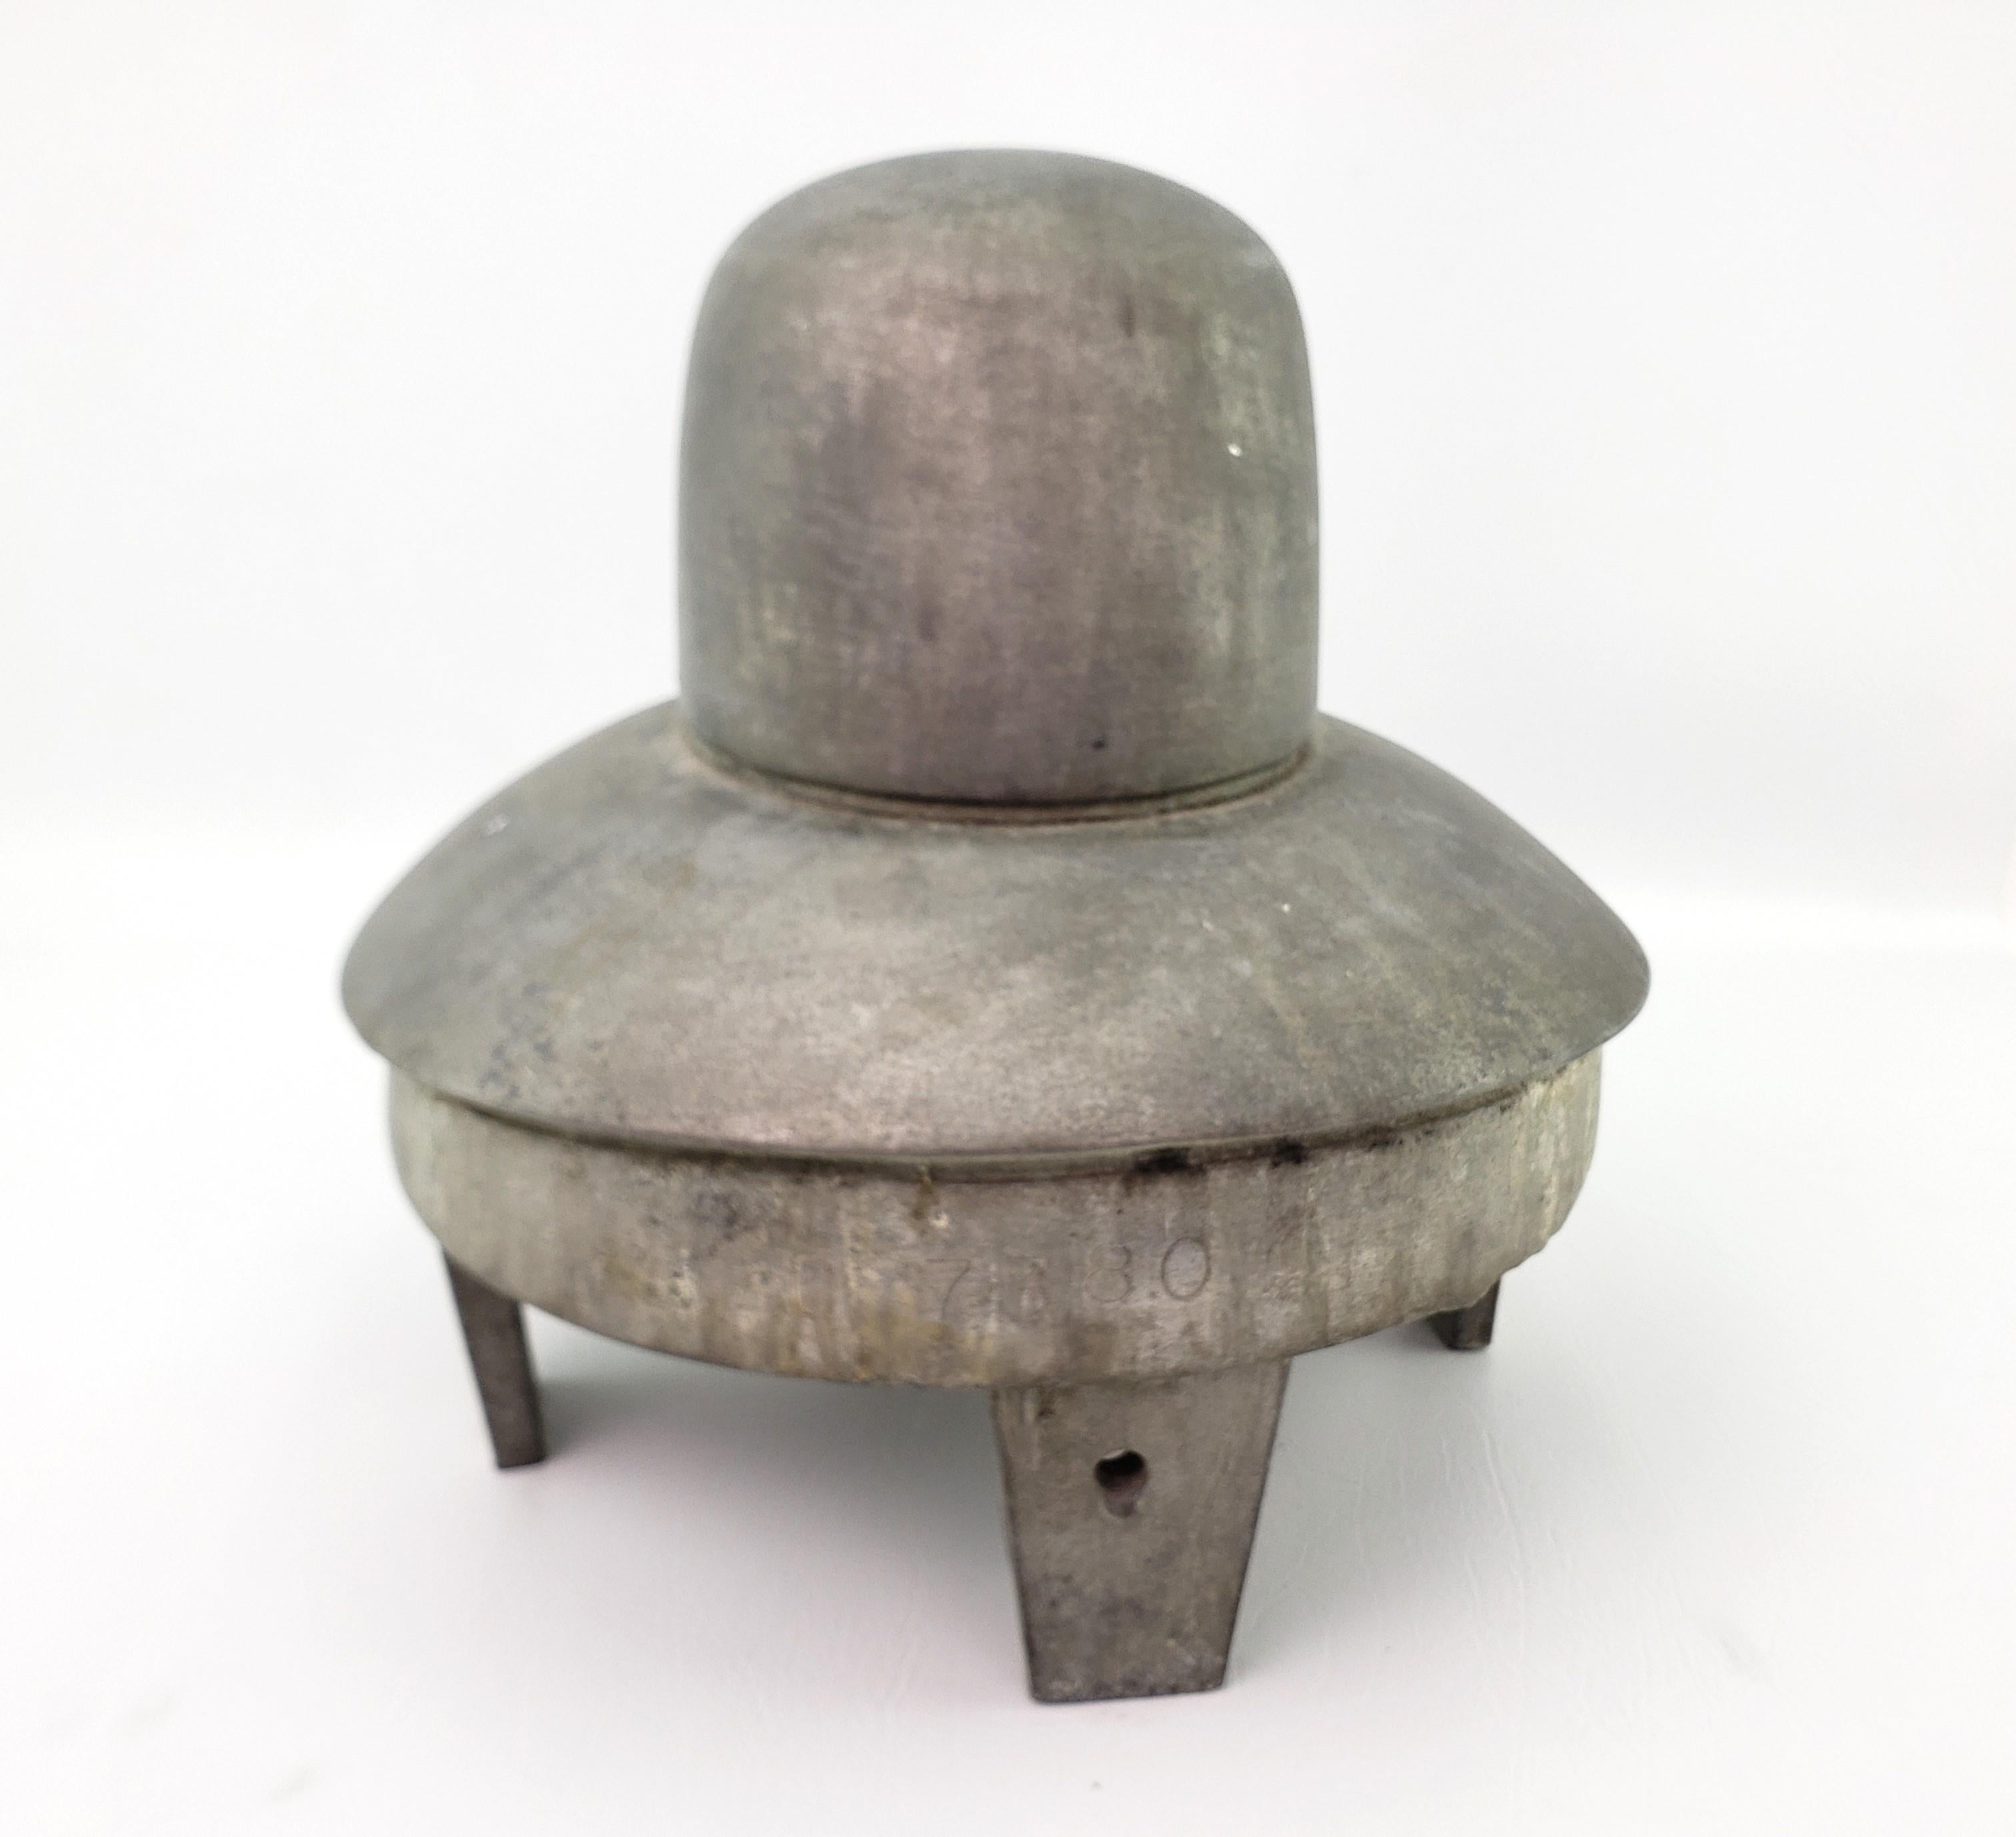 This antique ladies hat form does have a maker's impressed mark, but has become obliterated such that it is largely unidentifiable,but we presume it originates from the United States and dates to approximately 1920. This period Art Deco styled